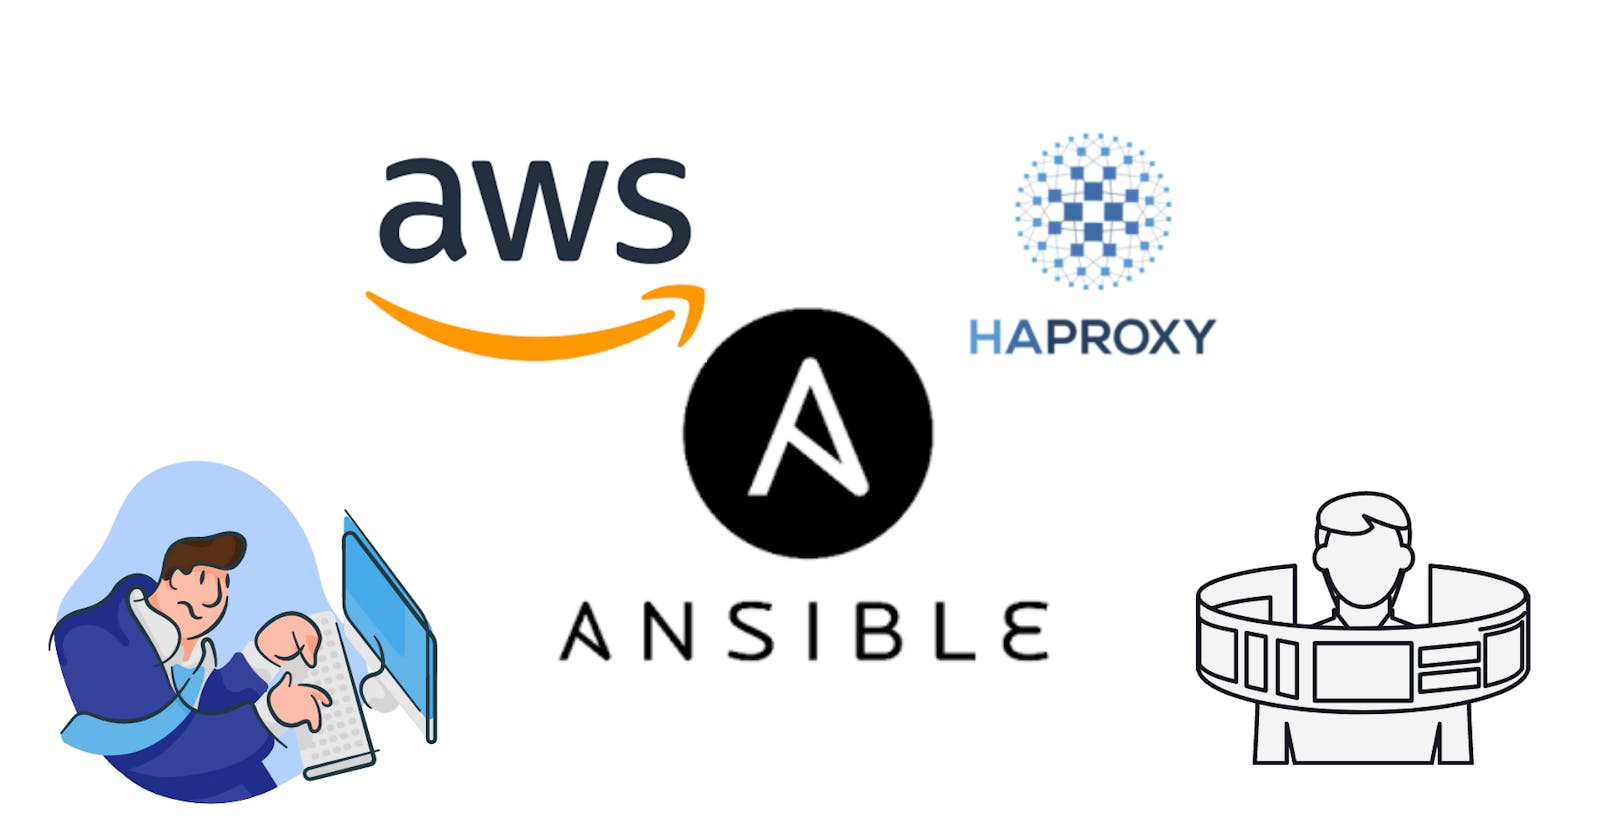 Configuring HAproxy in AWS Instances using Ansible